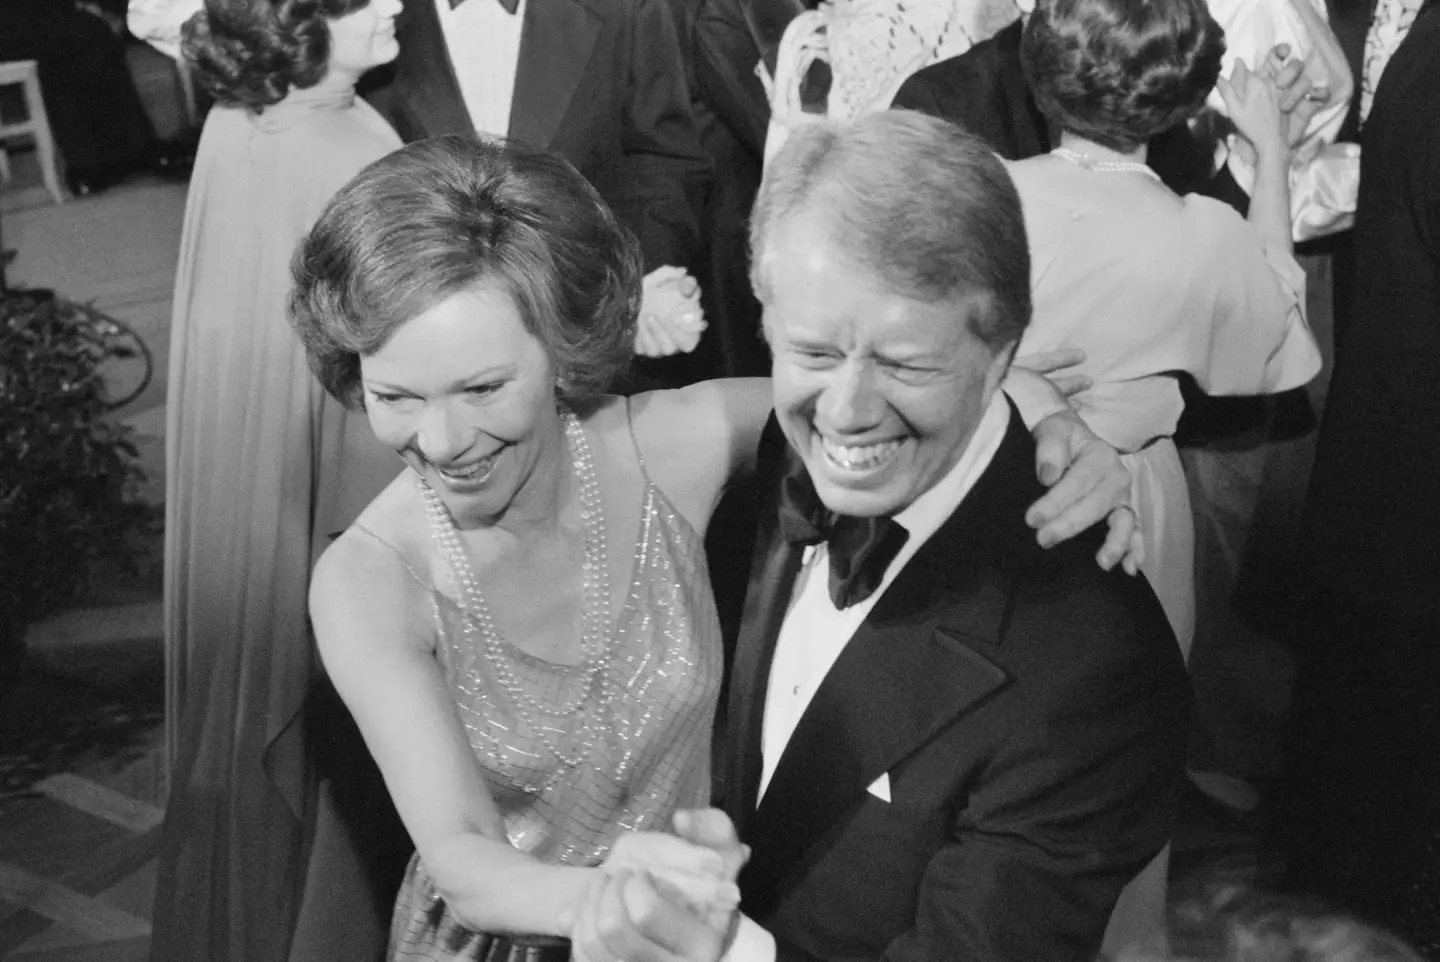 Rosalynn and Jimmy Carter dance together at a White House Congressional Ball in 1978.